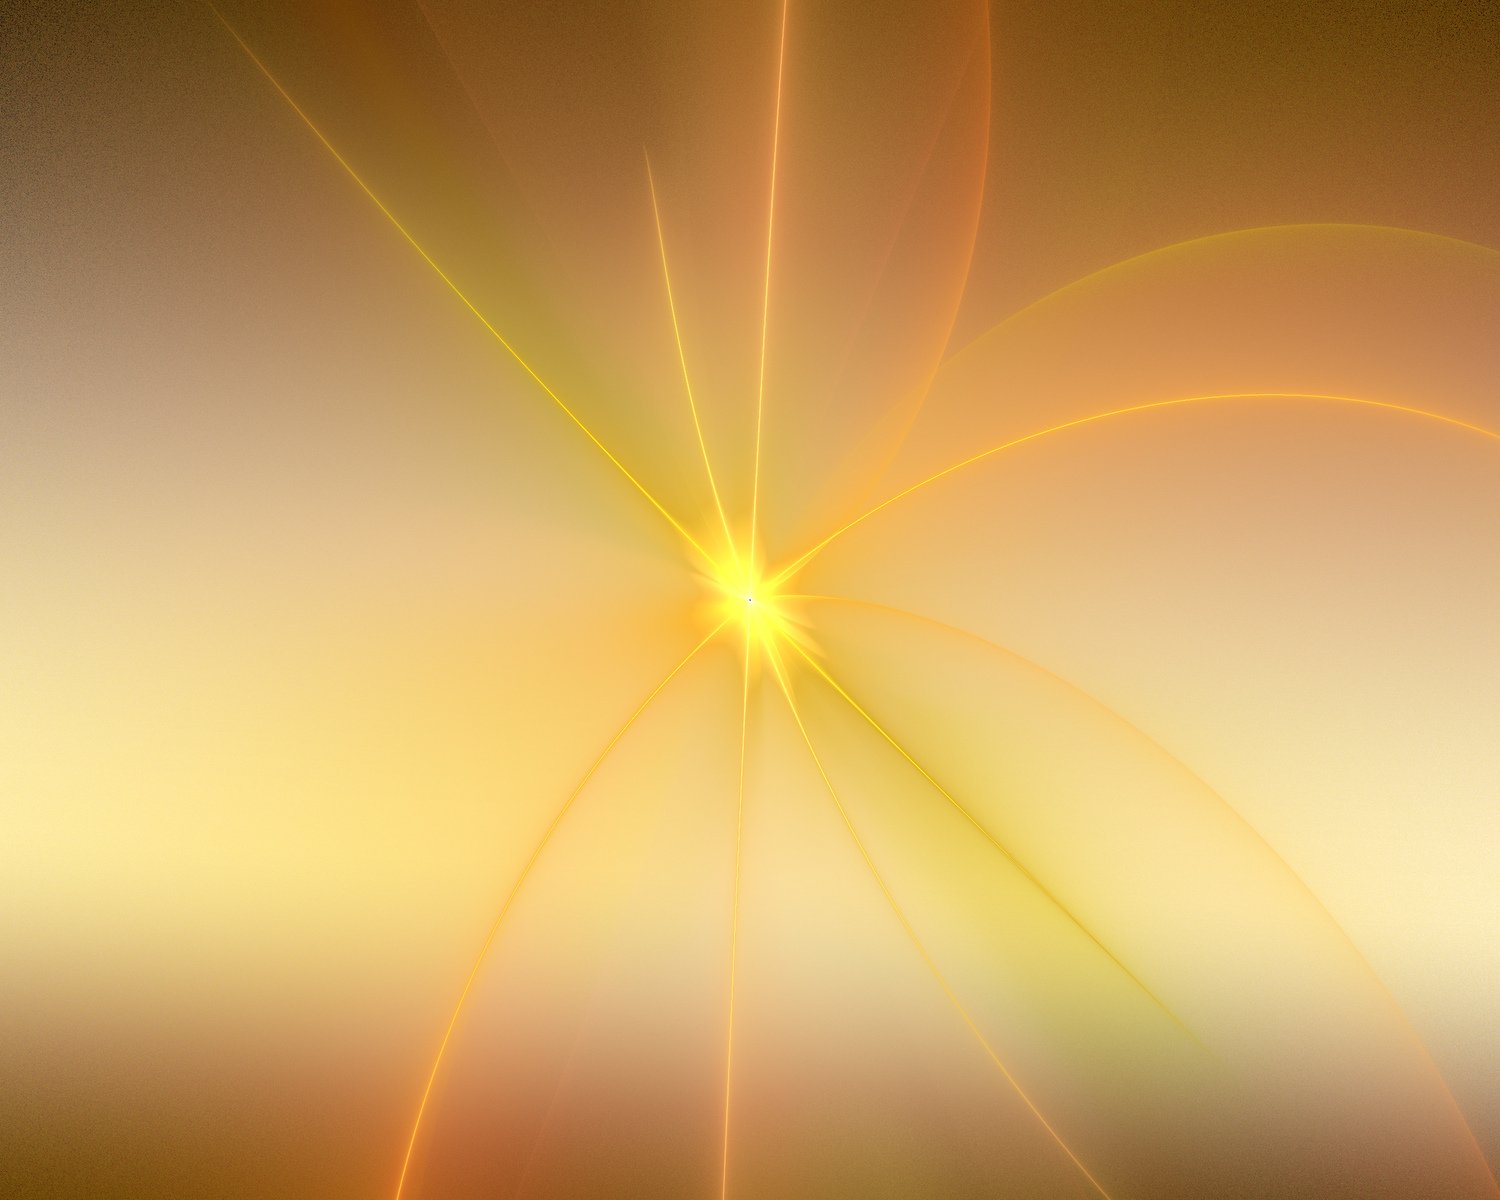 an abstract image of the center of a sunburst